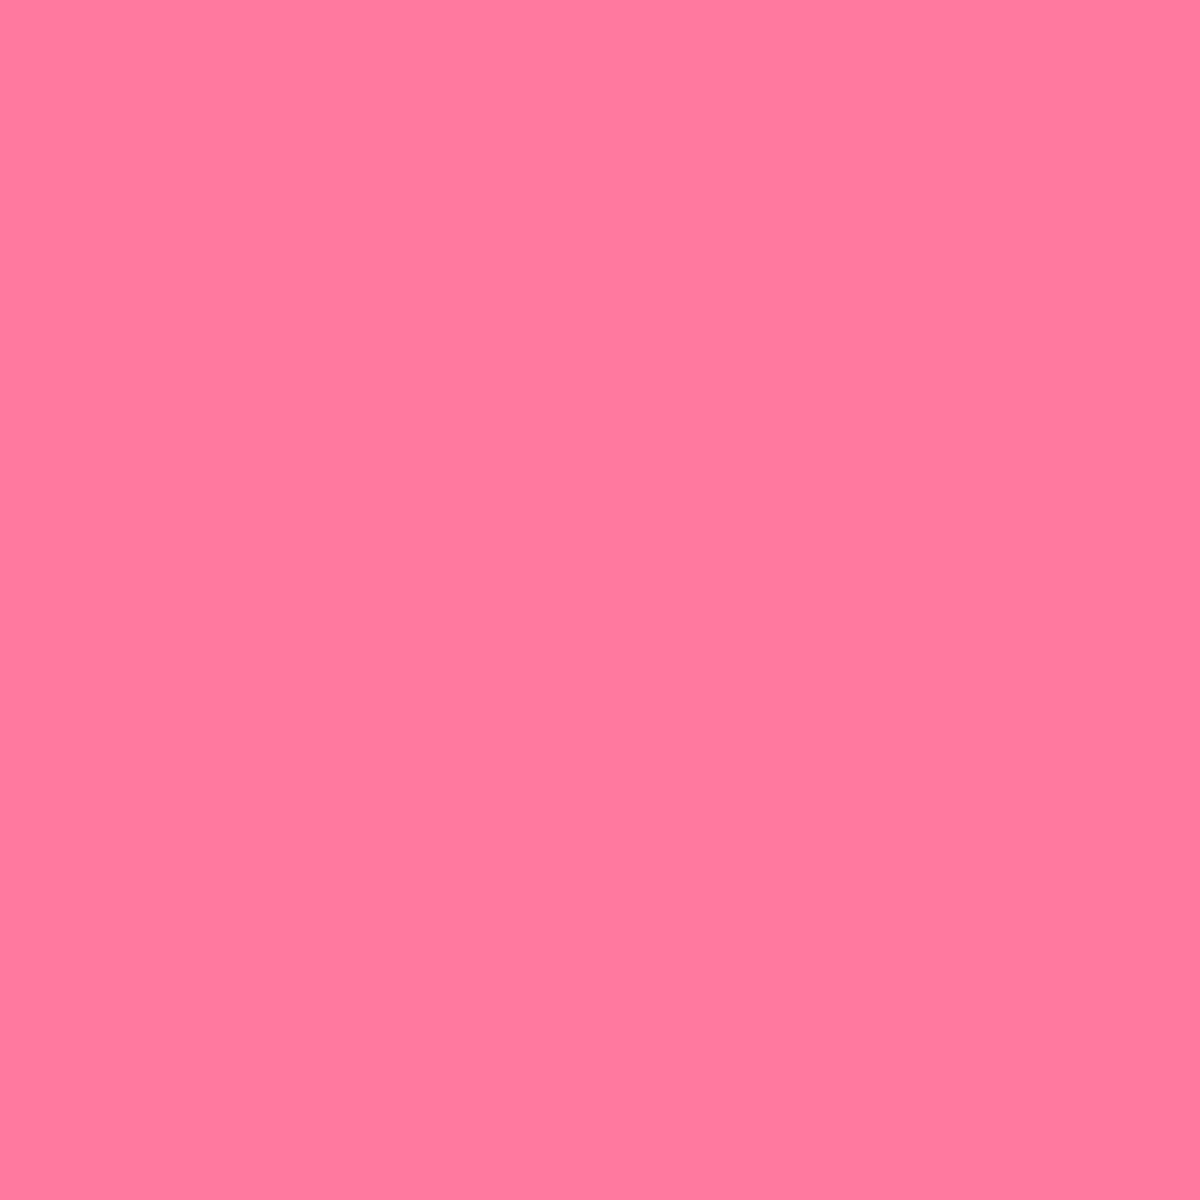 https://upload.wikimedia.org/wikipedia/commons/thumb/6/6d/Solid_pink.svg/1200px-Solid_pink.svg.png